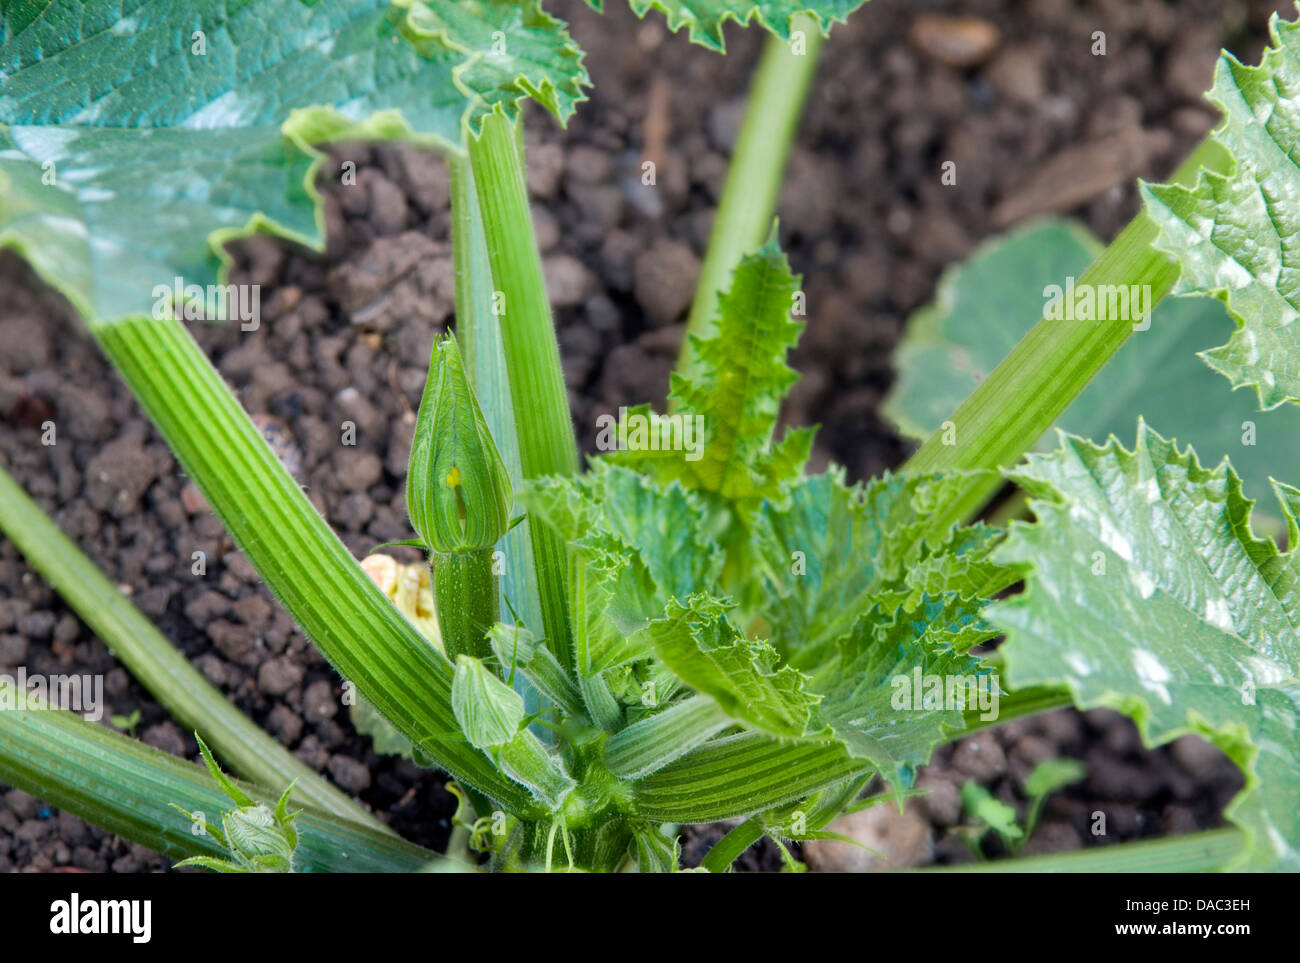 Organic courgette plant Stock Photo